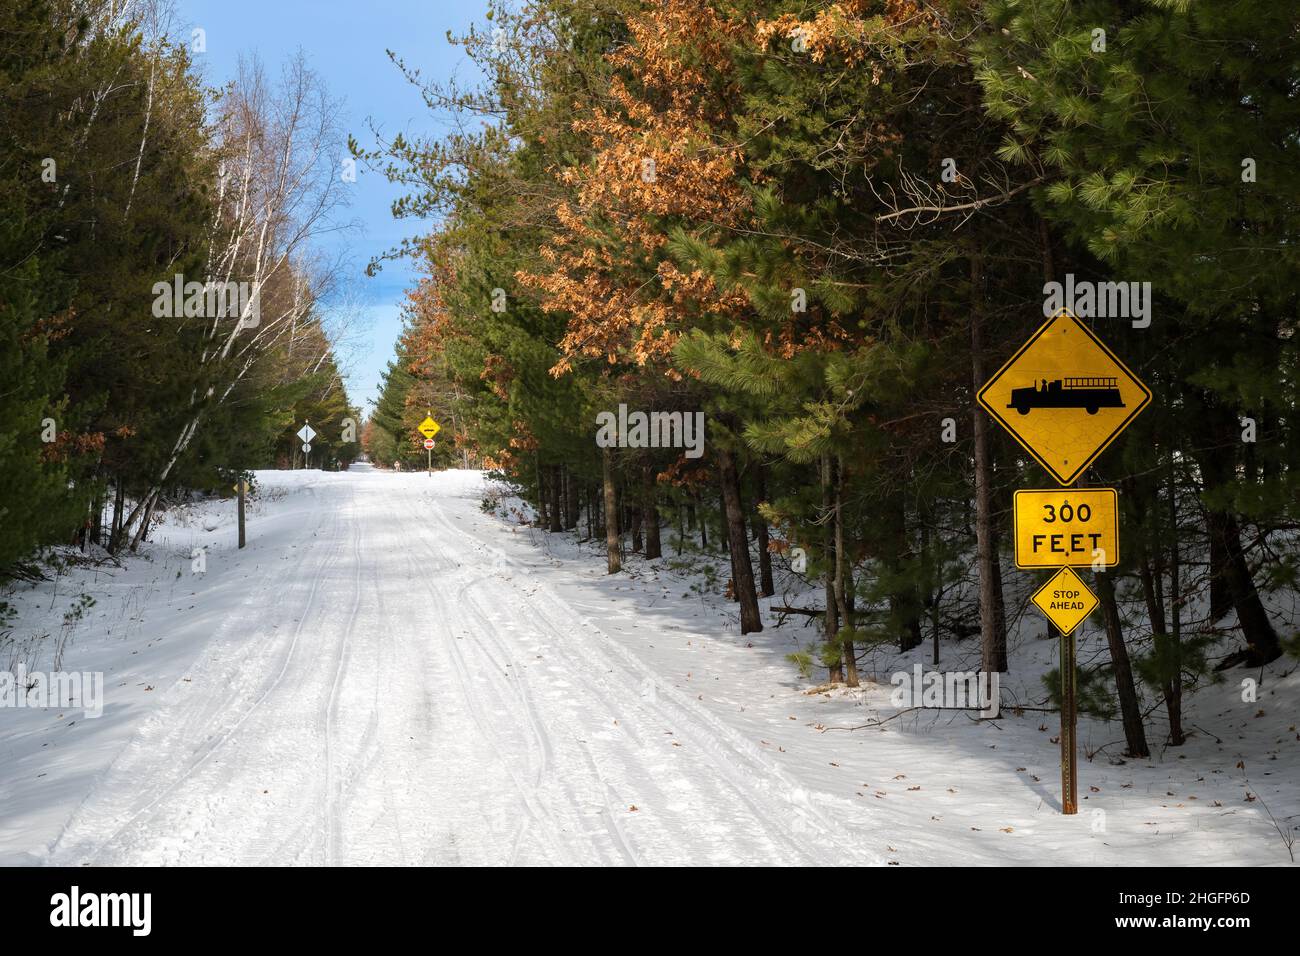 Groomed snow covered snowmobile and hiking trail through a forest in Central Minnesota with yellow signs. Paul Bunyan State Trail in Nisswa. Stock Photo